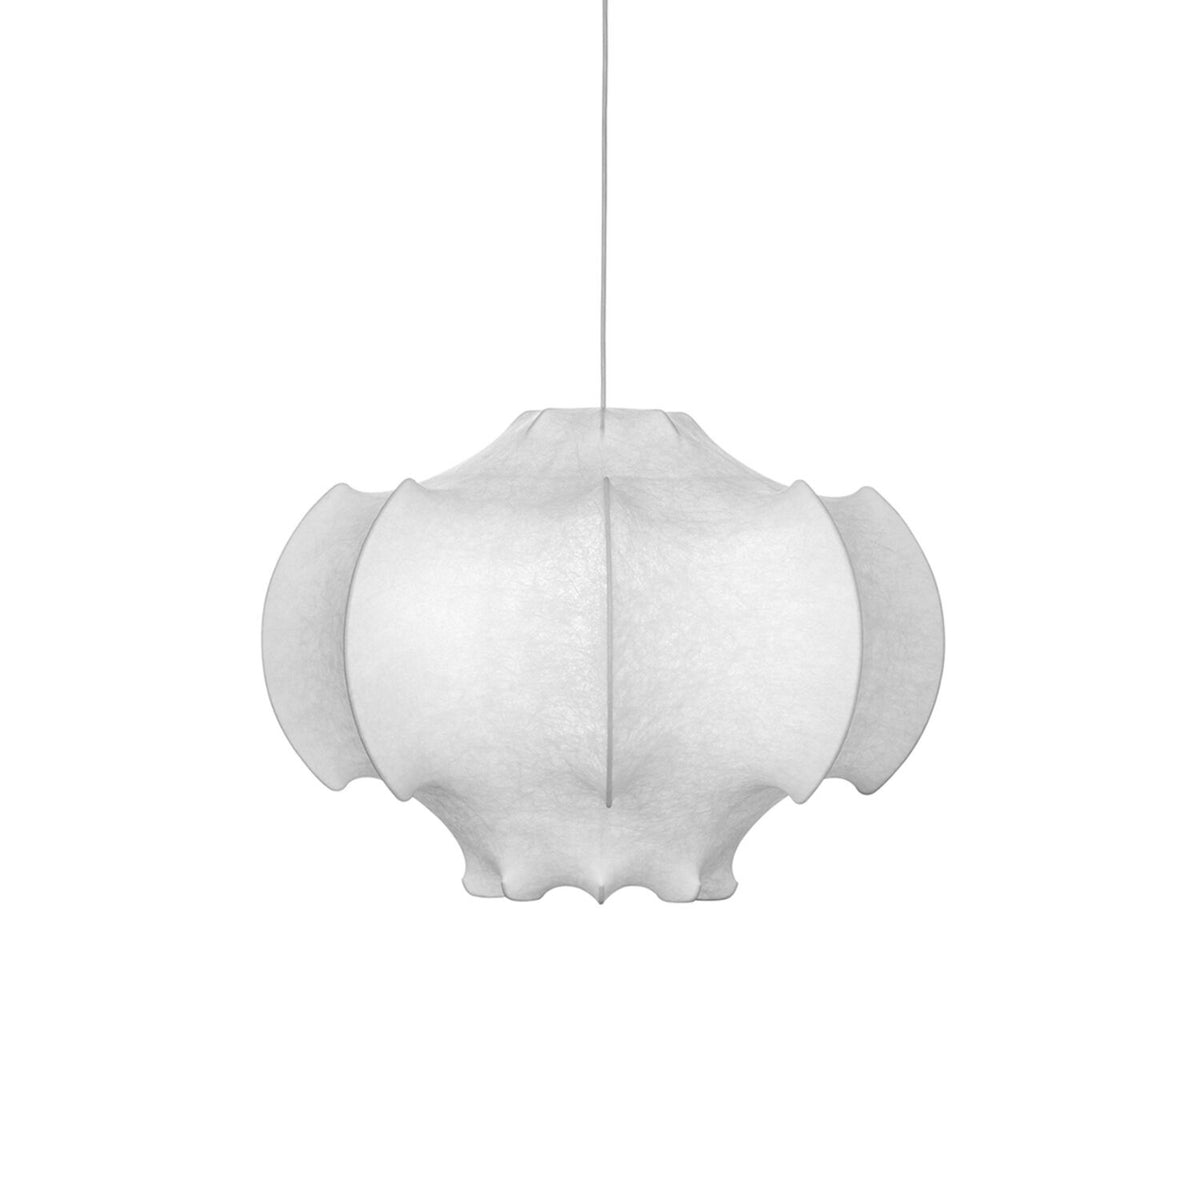 VISCONTEA DIMMABLE PENDANT LIGHT MADE OF COCOON MATERIAL BY ACHILLE CASTIGLIONI